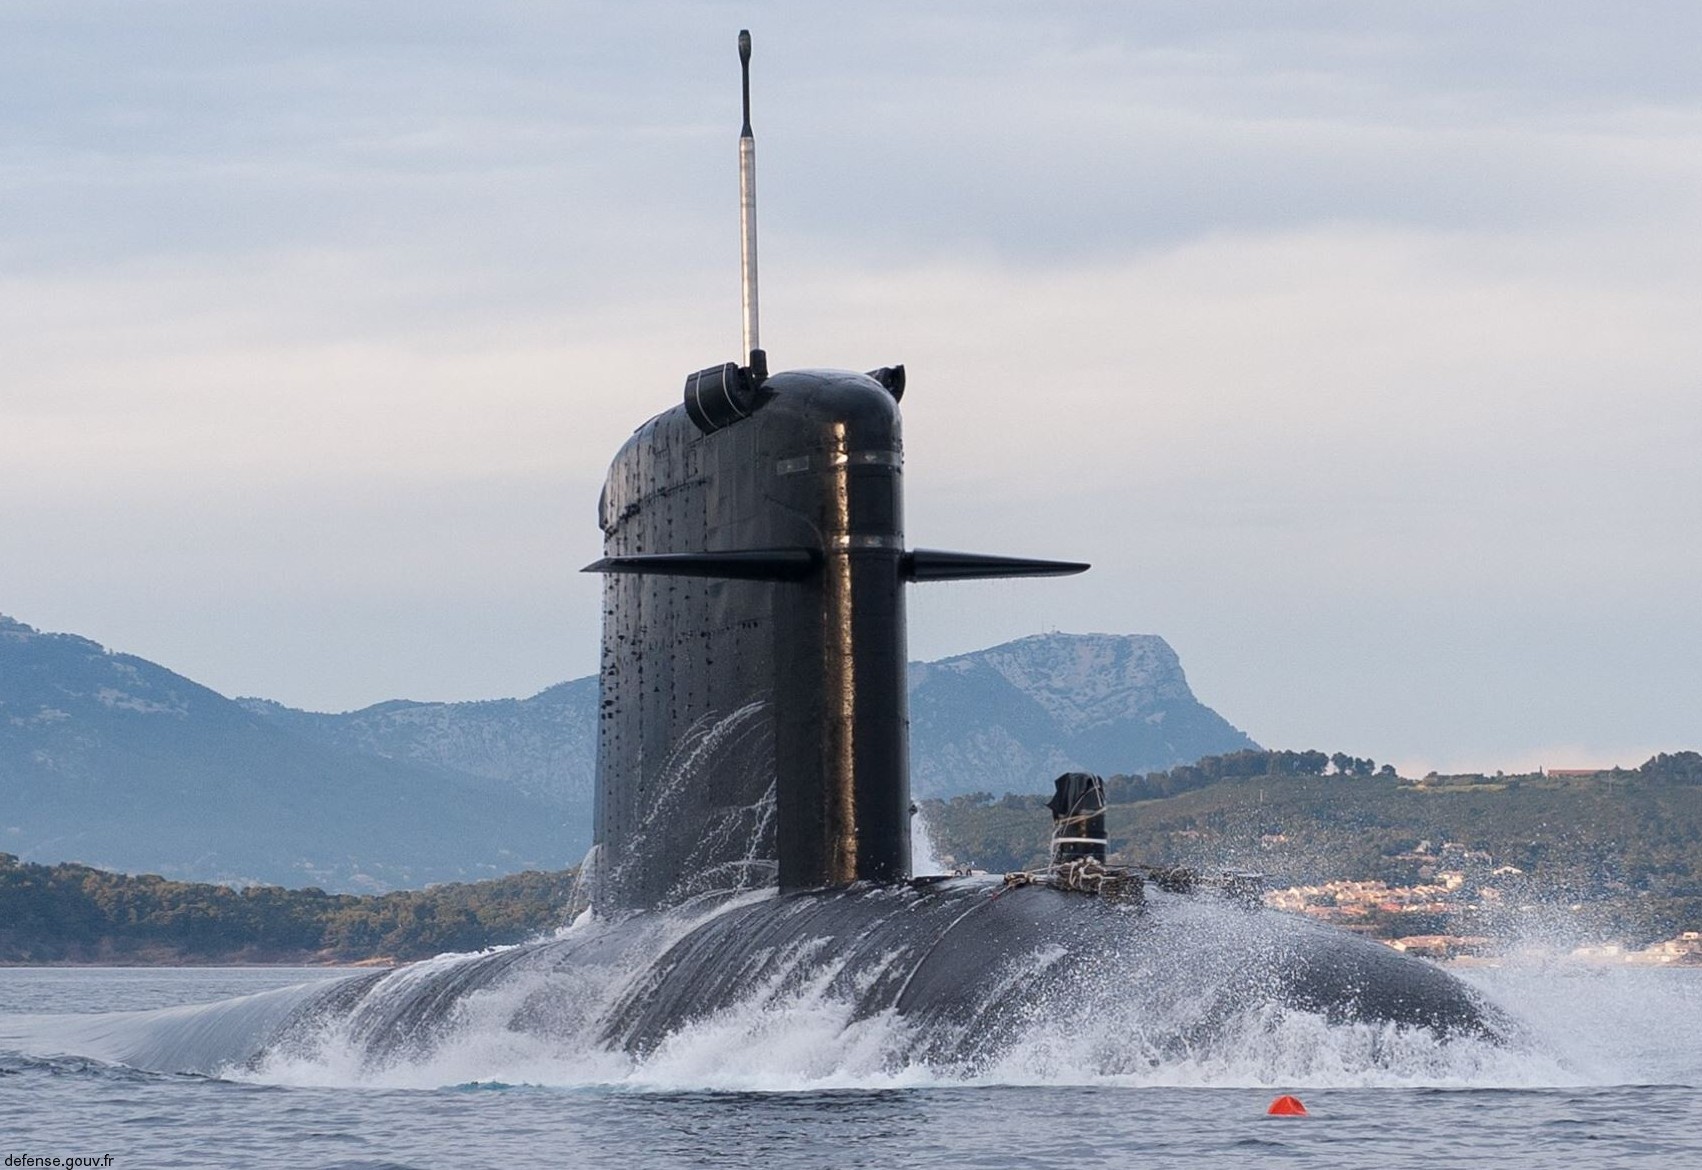 rubis class attack submarine ssn french navy marine nationale sna sous-marin nucleaire d'attaque 17